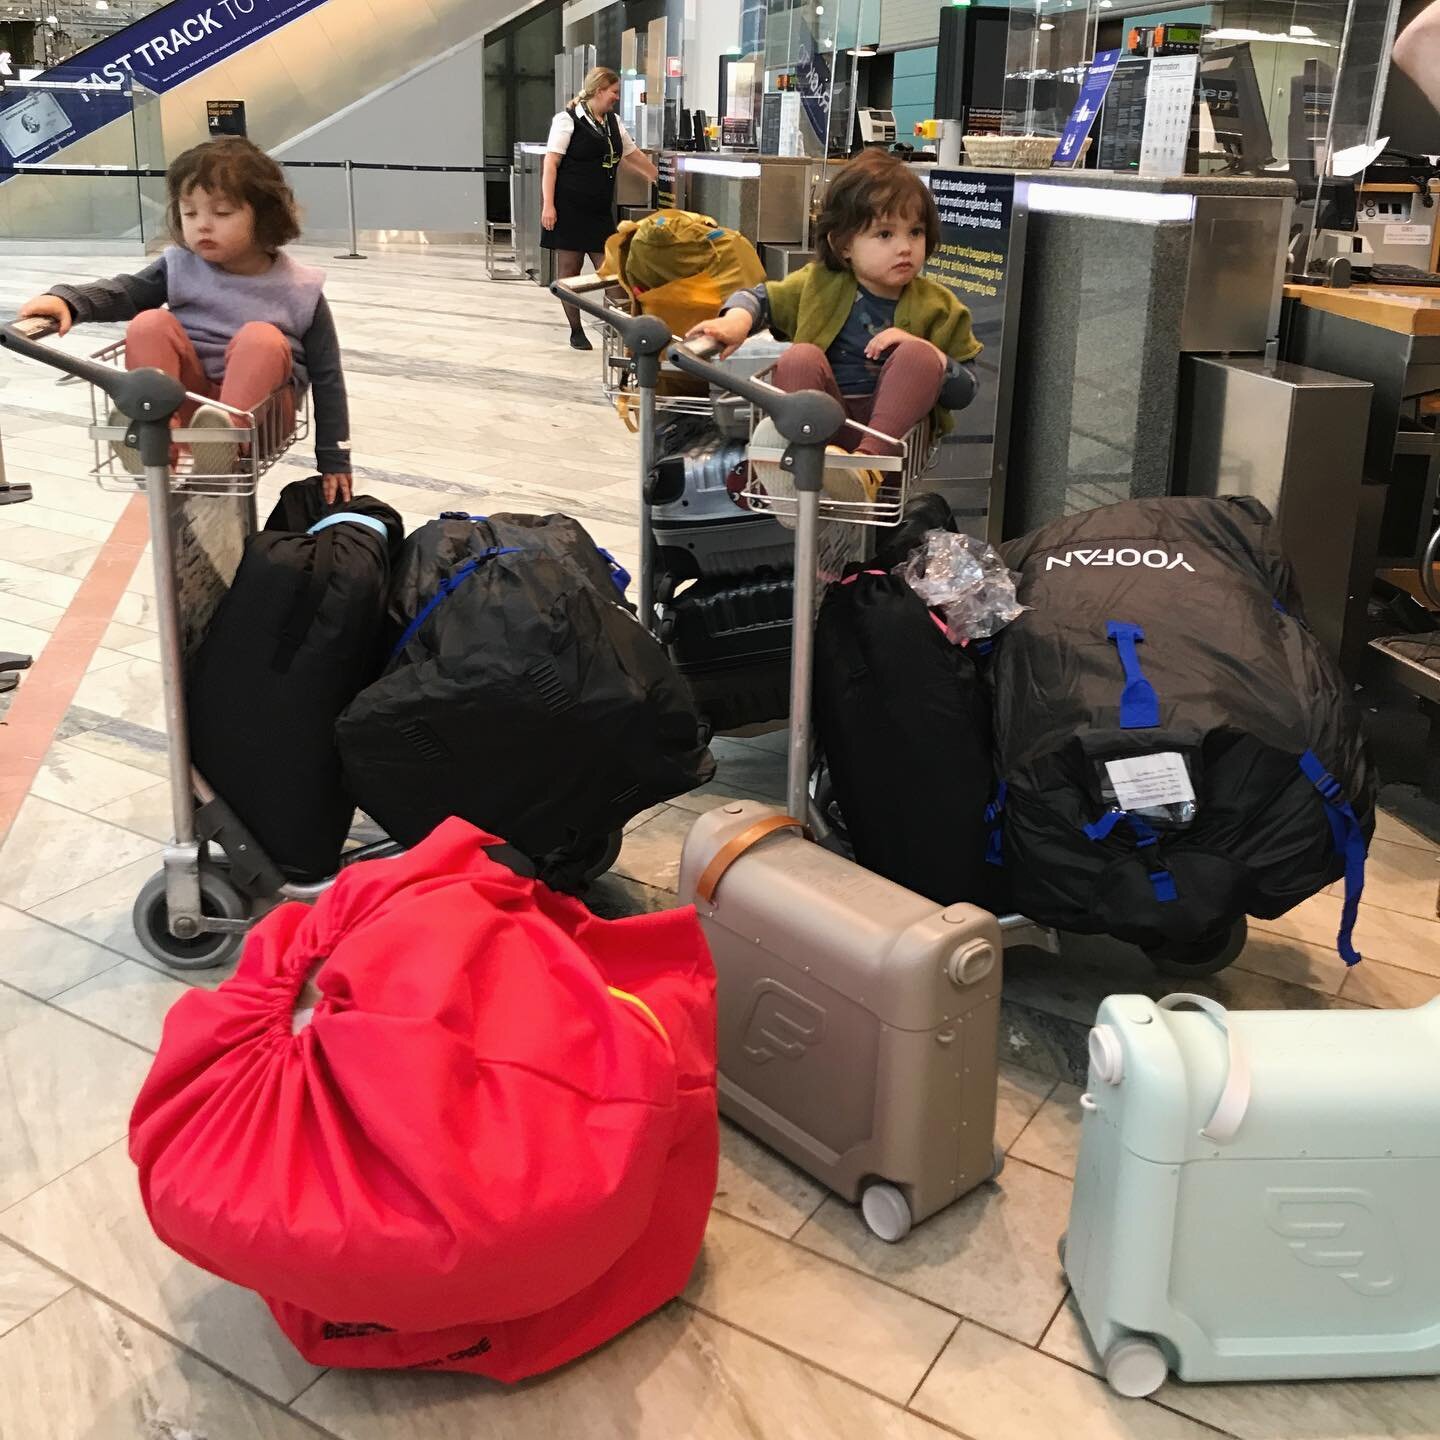 Traveling light is no longer possible. Flying to Shanghai with 3 car seats, 2 strollers, 3 check in luggages, 4 carry ons 😂  I can fit my own stuff in a carry on, but most of the rest is for the kids. #twinlife